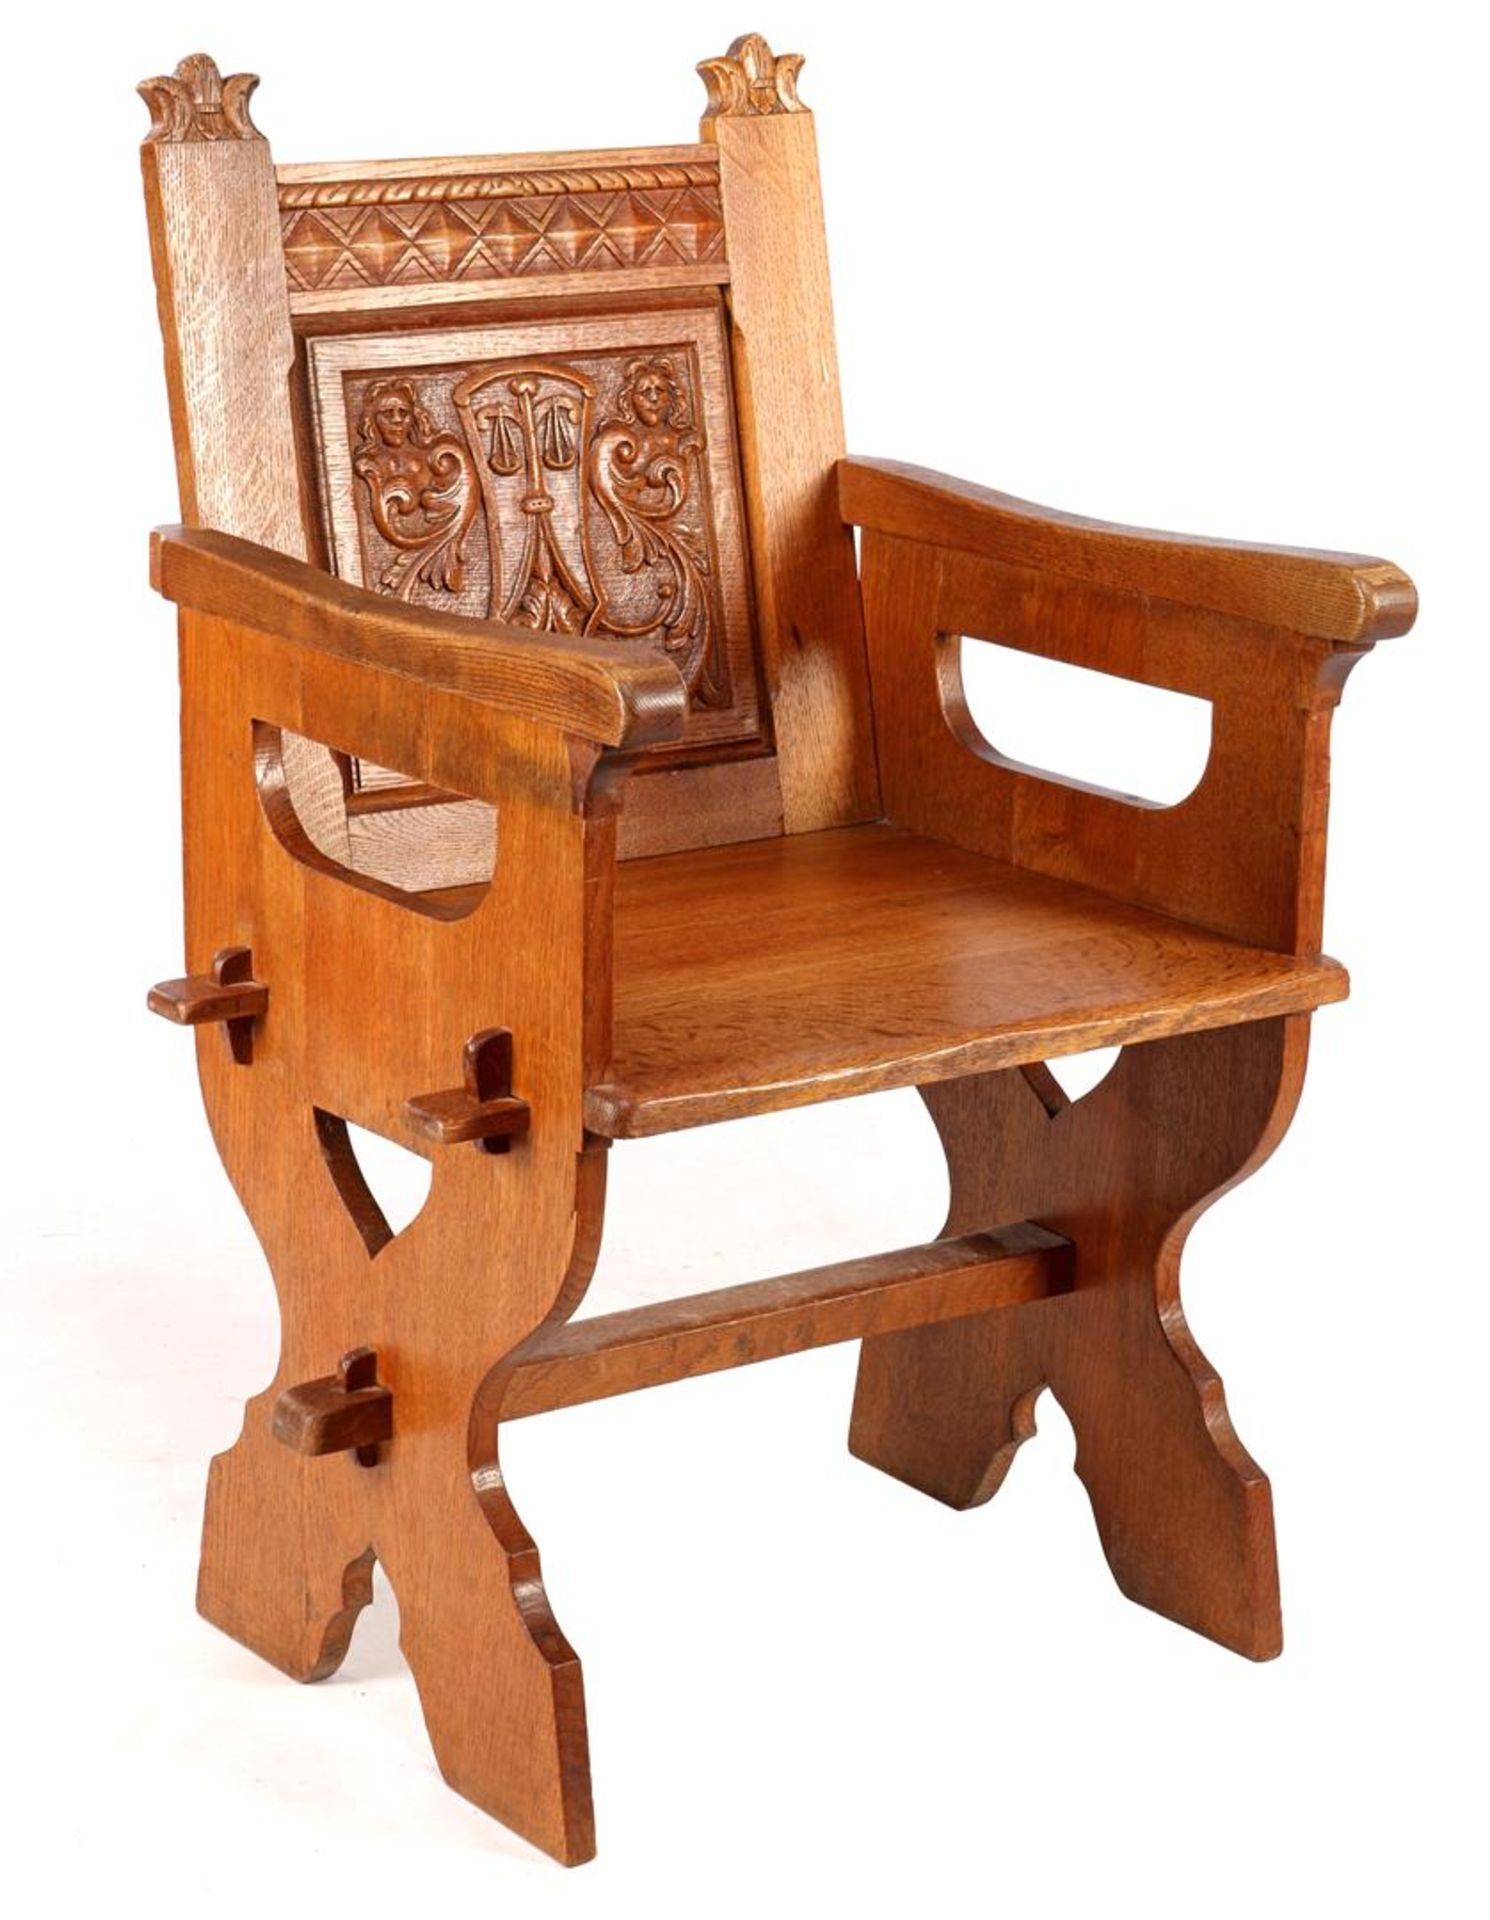 Oak armchair with decorated backrest